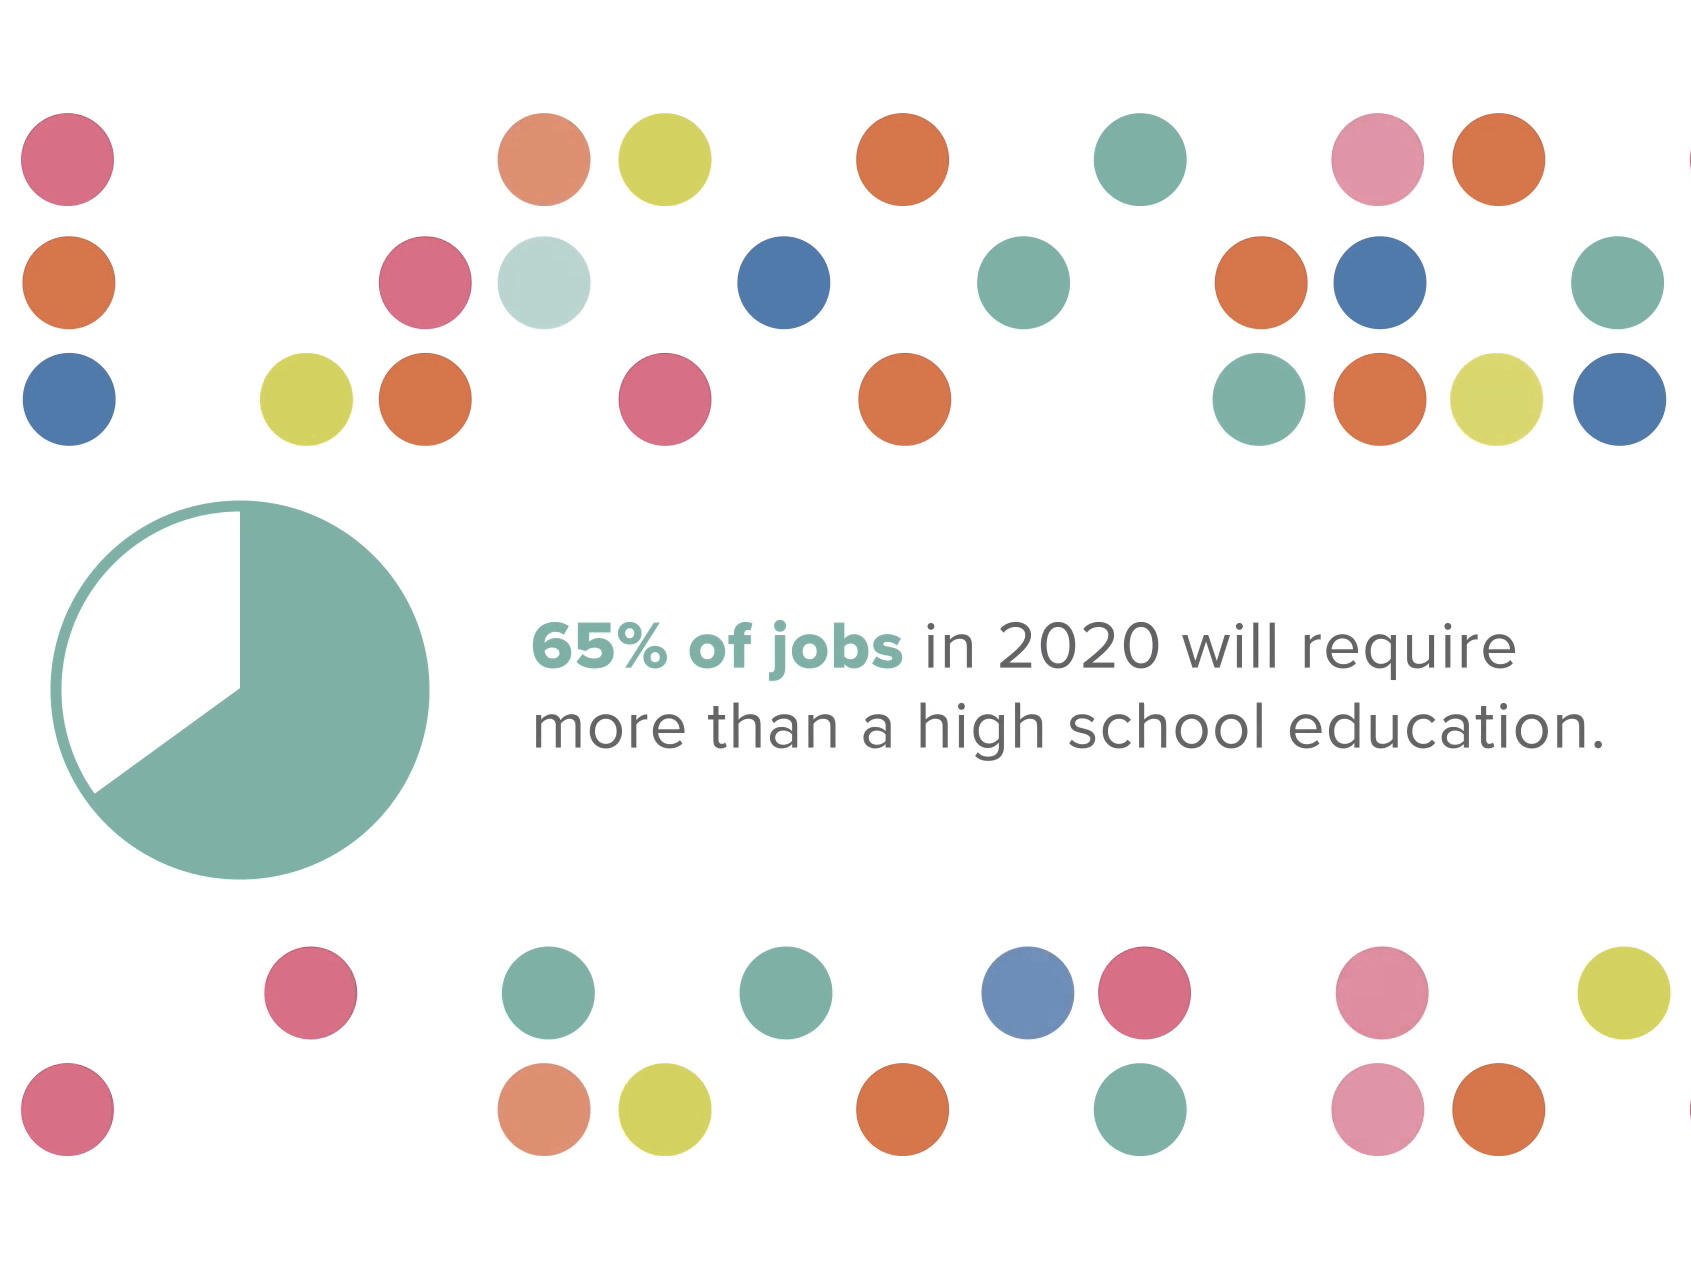 65% of jobs in 2020 will require more than a high school education.